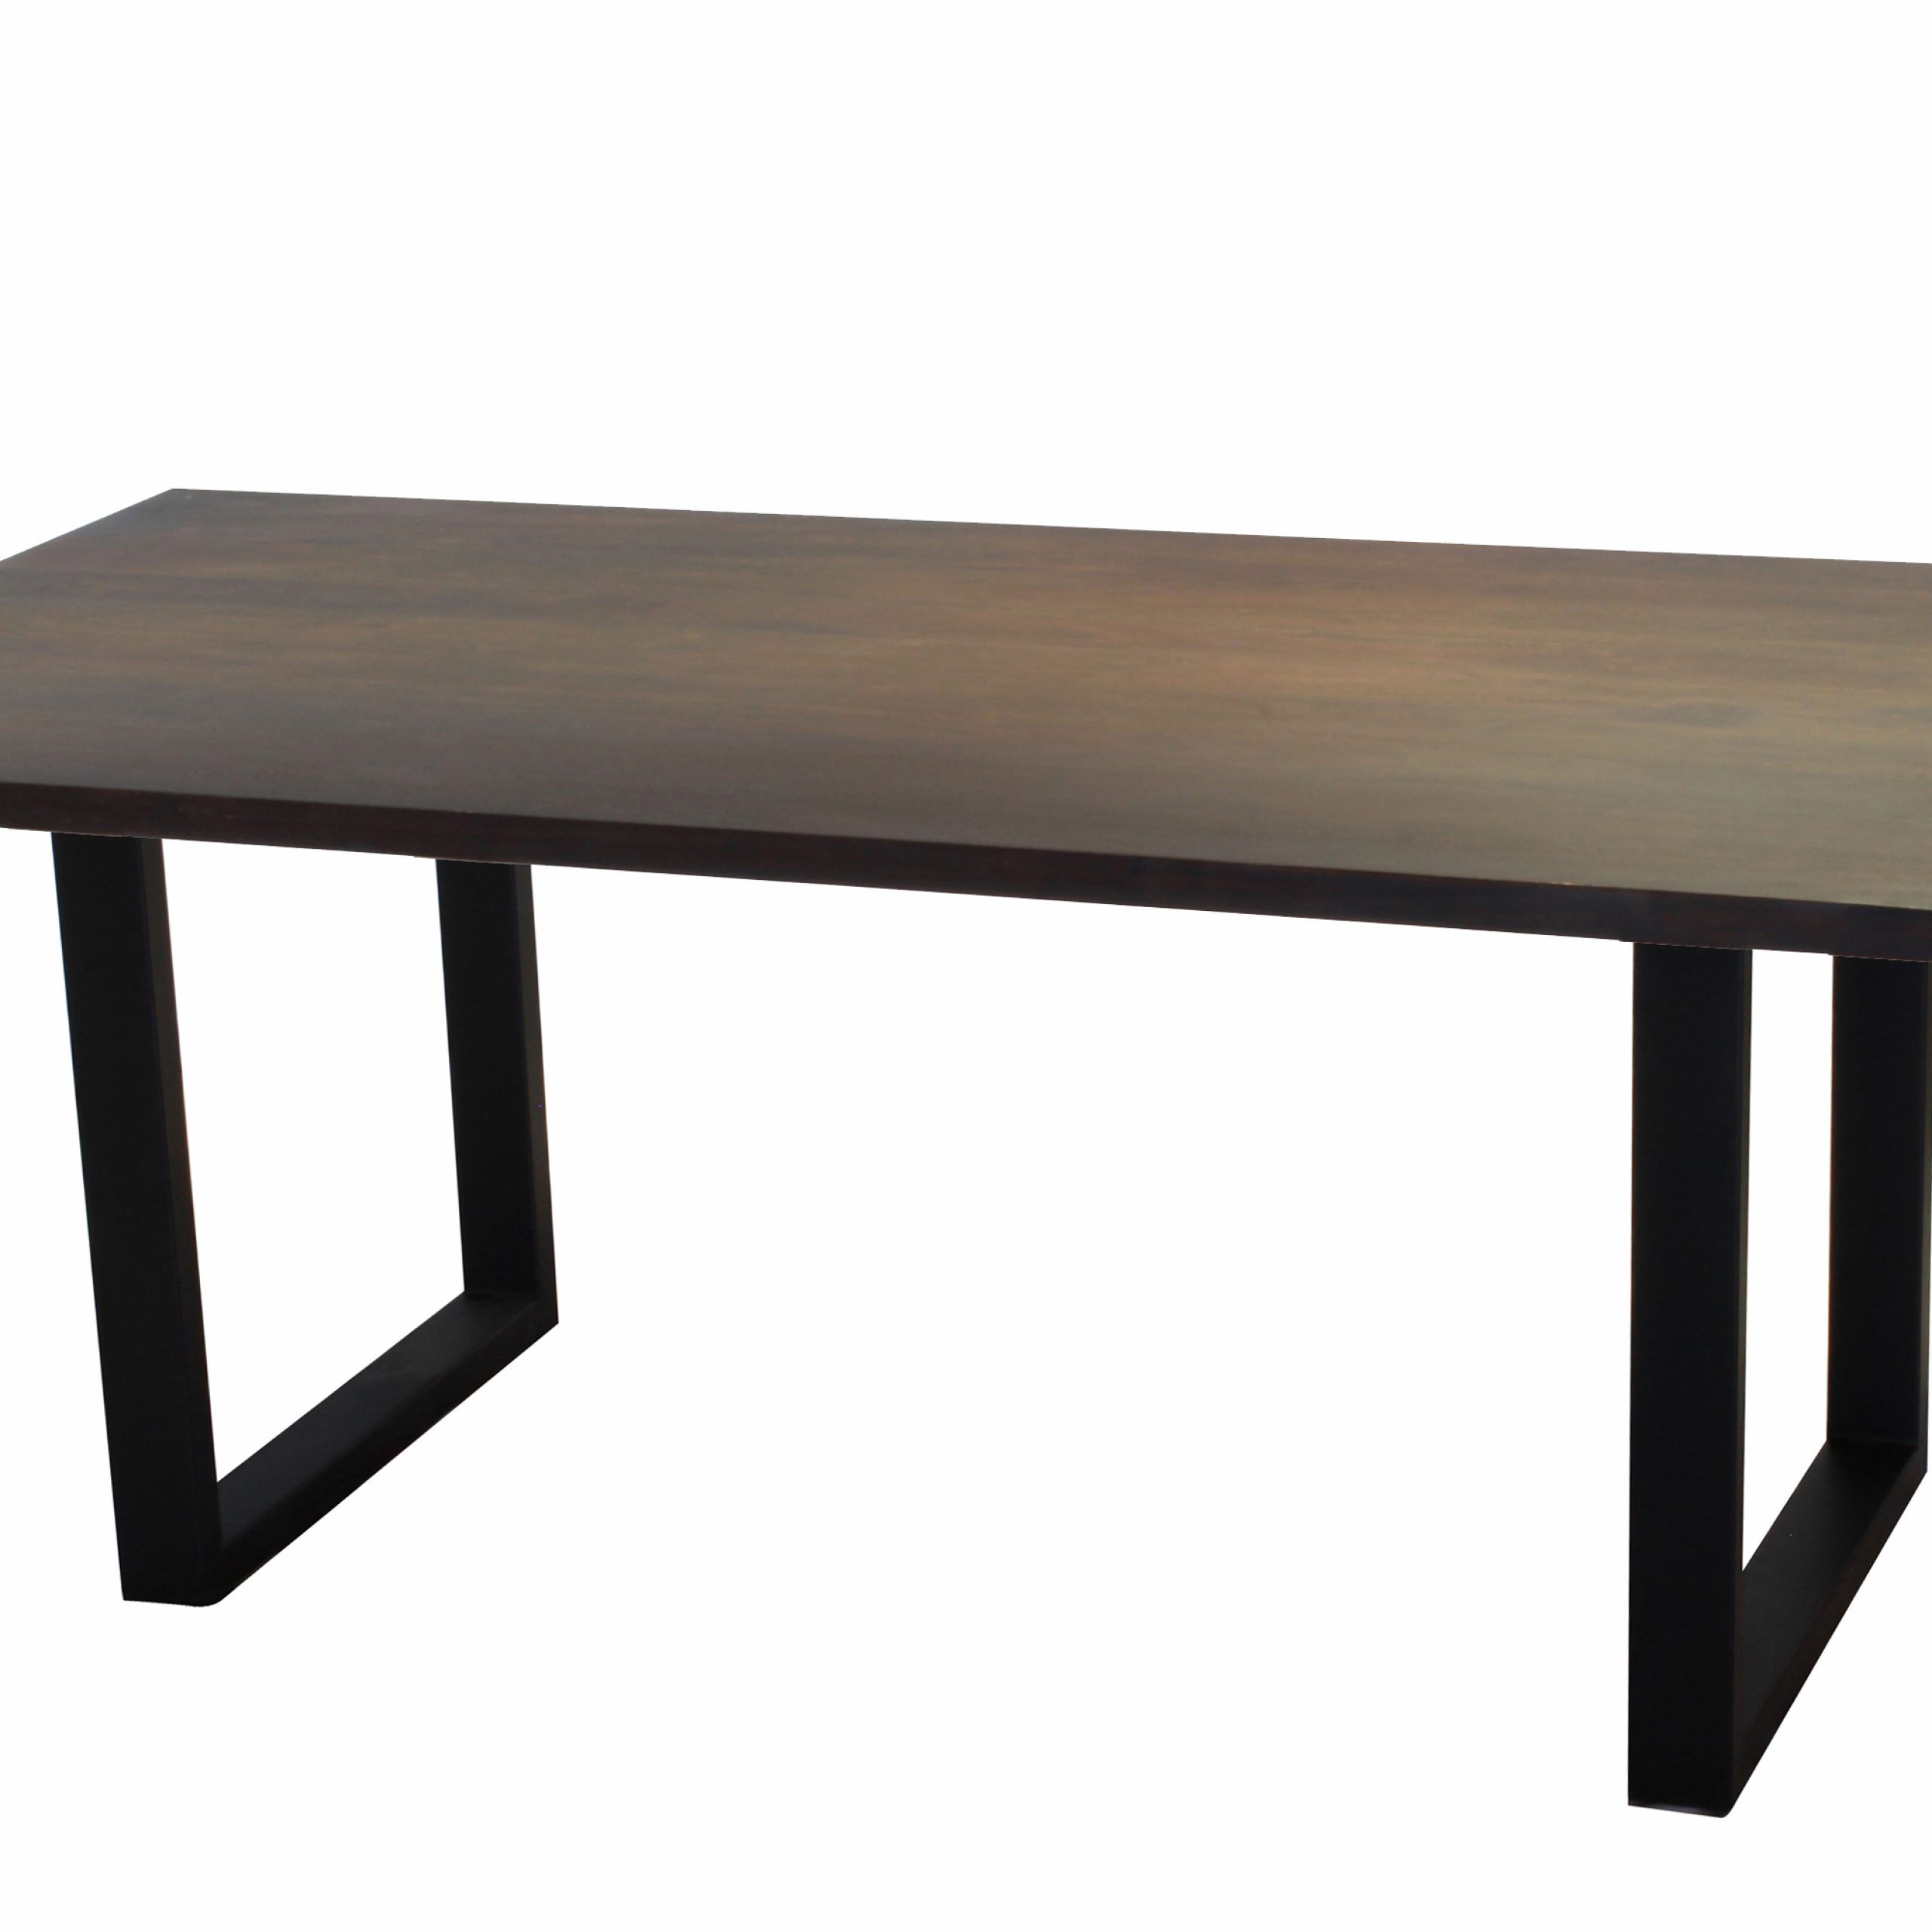 Acacia Dining Tables With Black Victor Legs With Regard To Fashionable Corcoran Acacia Live Edge Dining Table With Black Victor Legs – 96" (View 3 of 25)